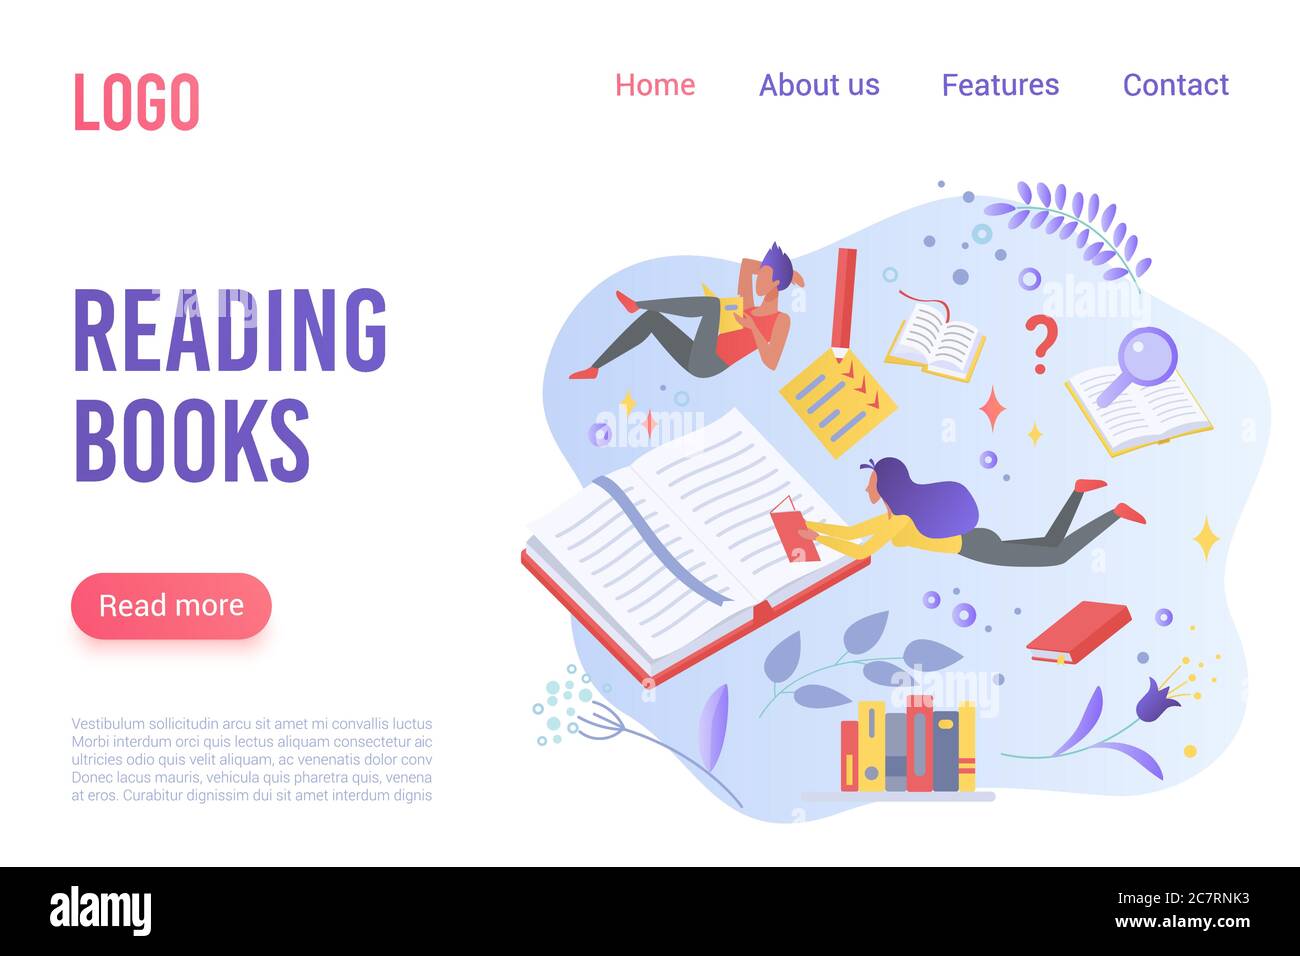 Reading books flat vector landing page template. Cartoon readers immersed in fantasy world metaphor. Learning, knowledge acquisition idea. Bookshop promotional website page design layout. Stock Vector